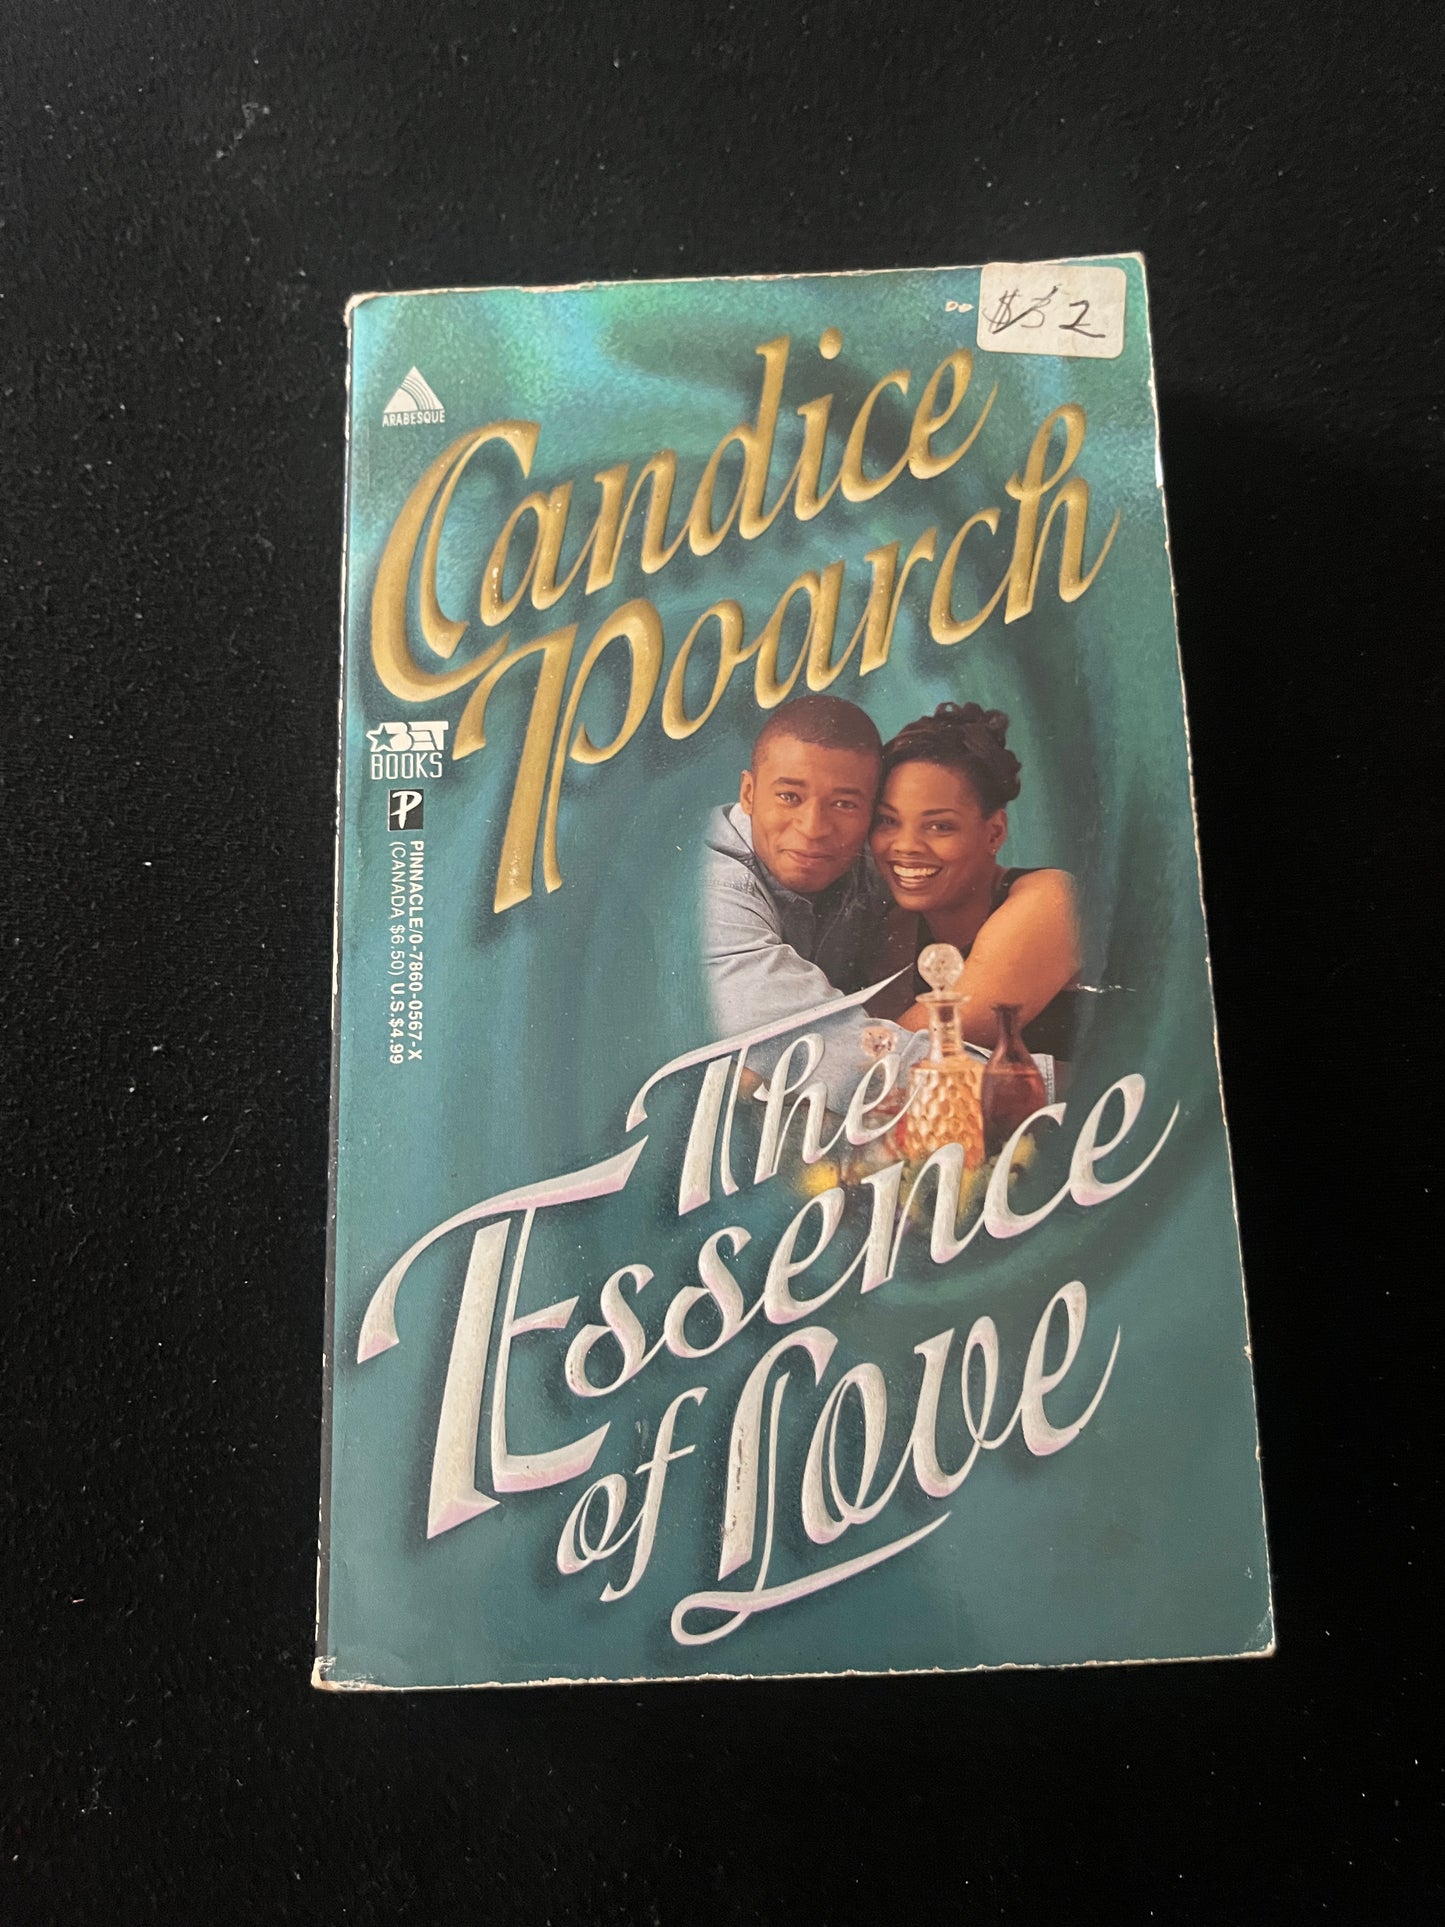 THE ESSENCE OF LOVE by Candice Poarch